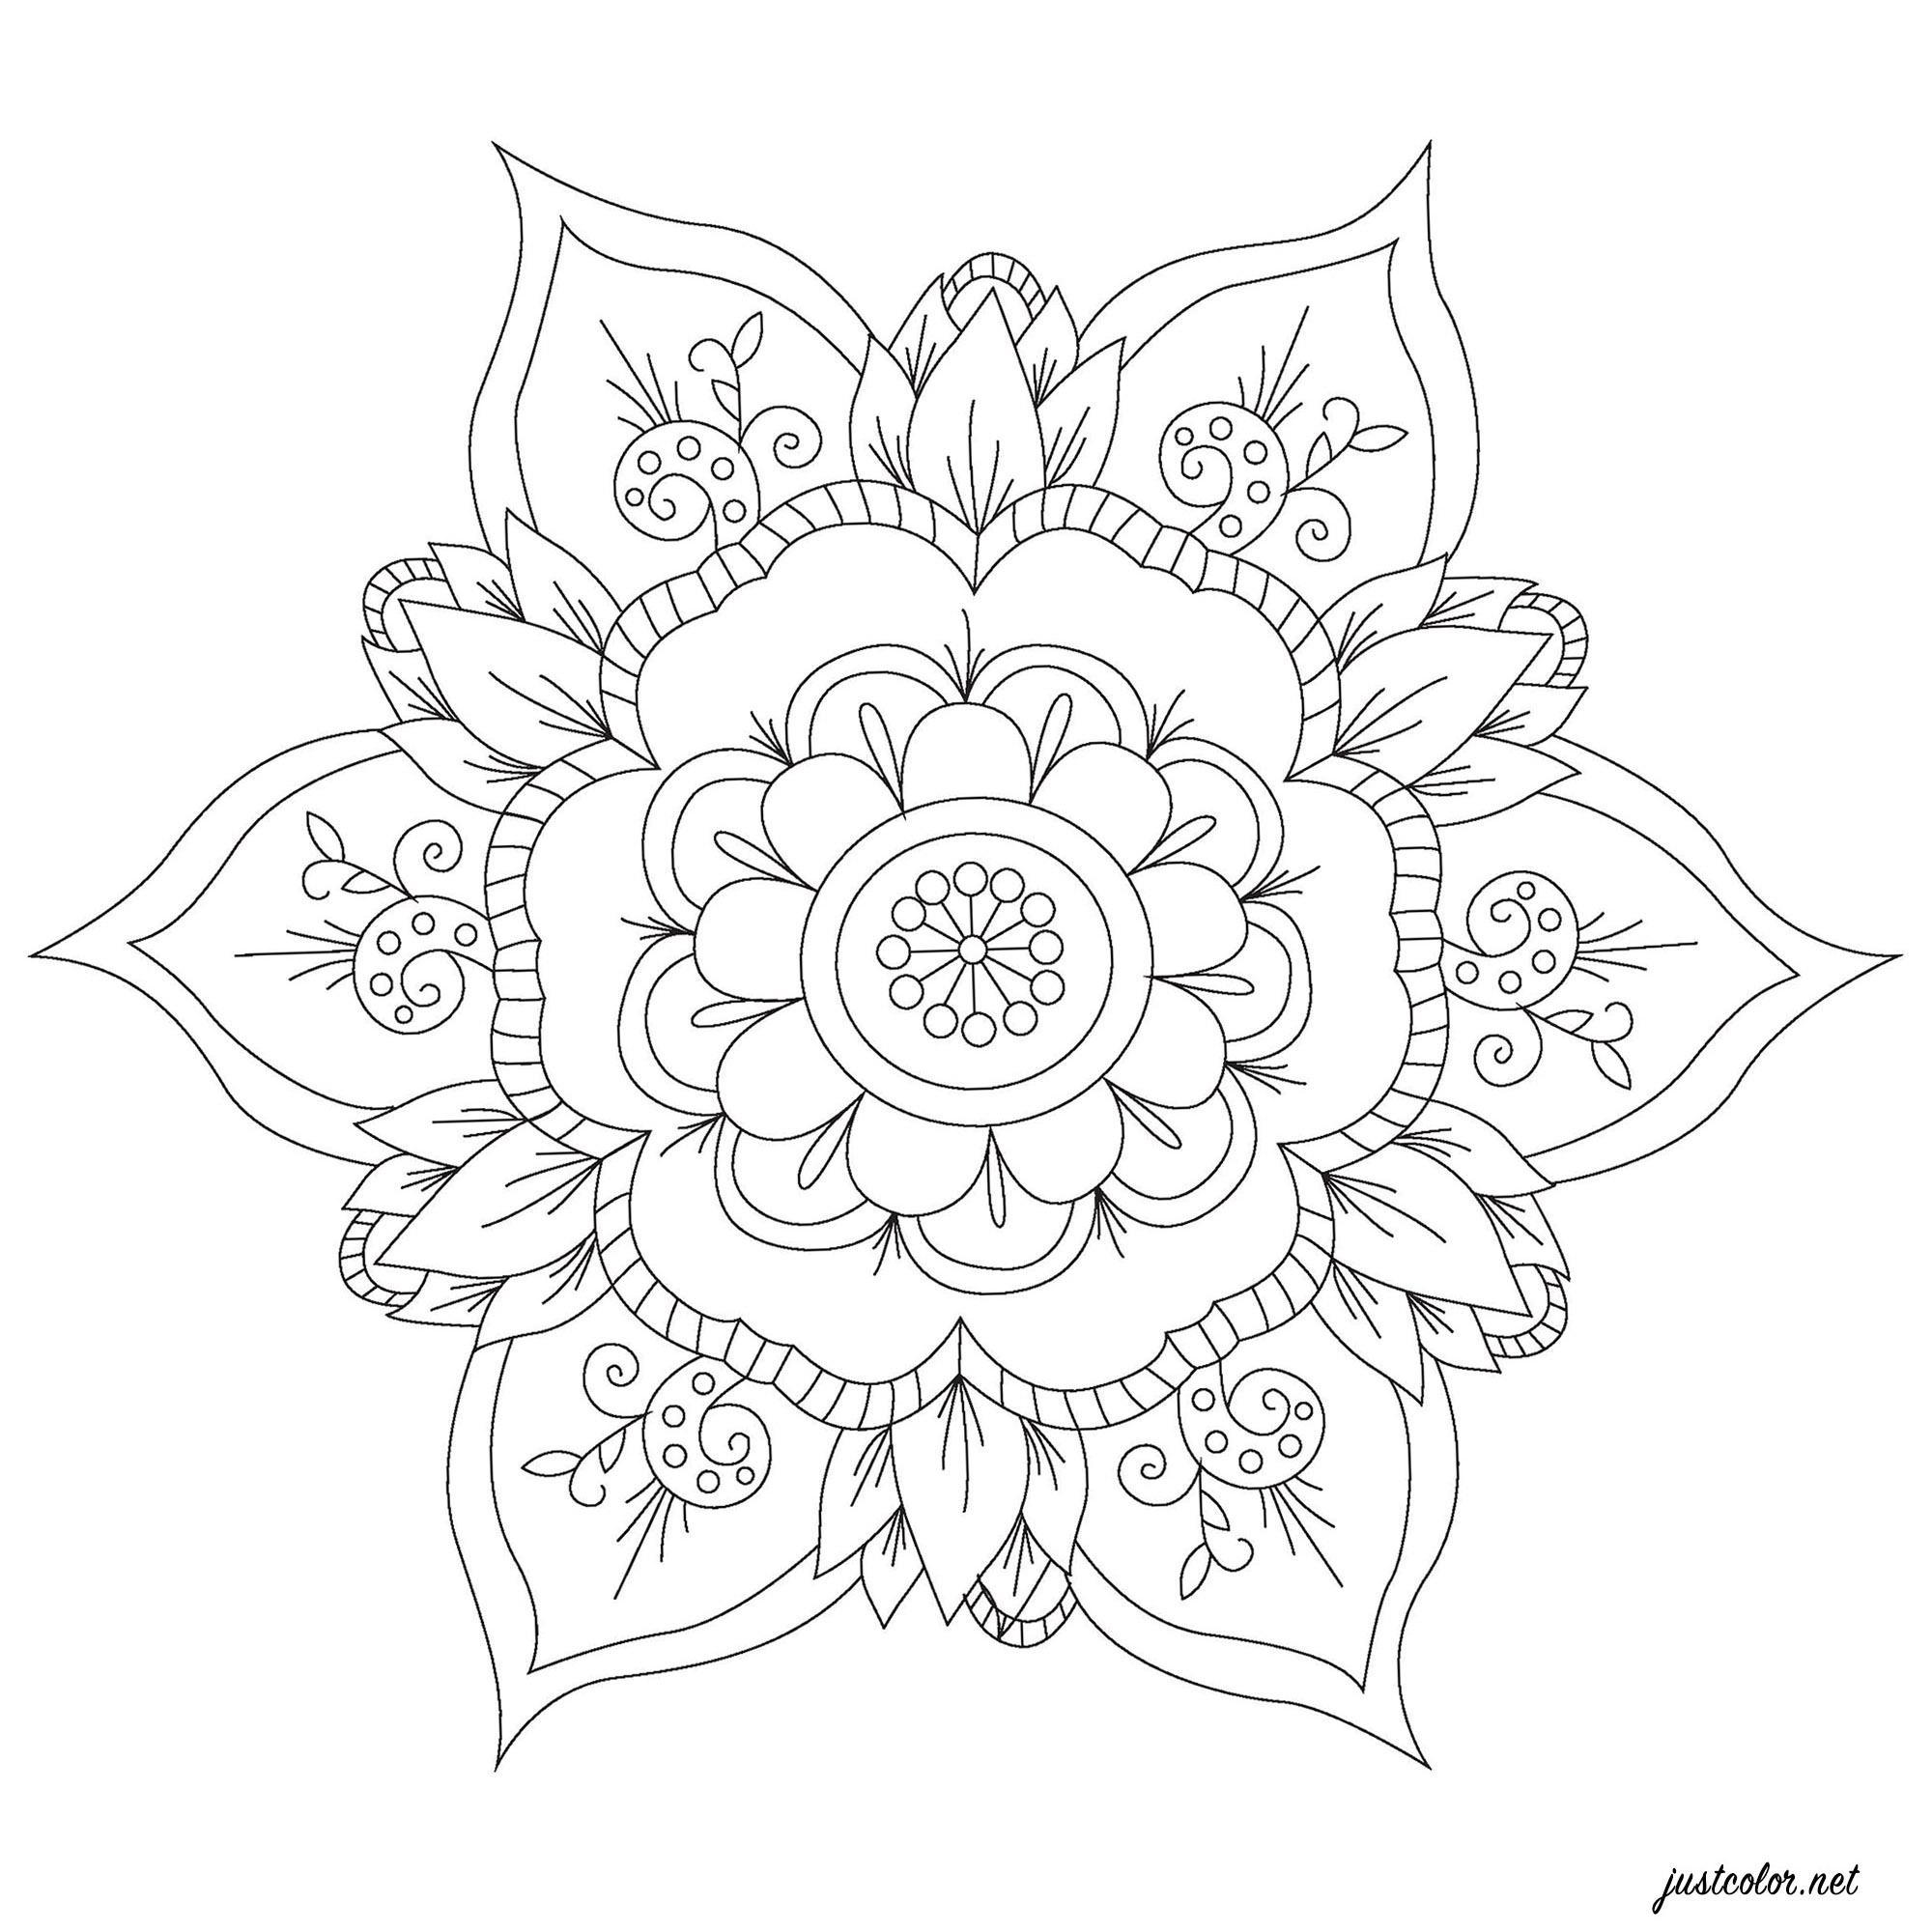 Simple and cute Mandala with harmoniously distributed flowers, petals and leaves